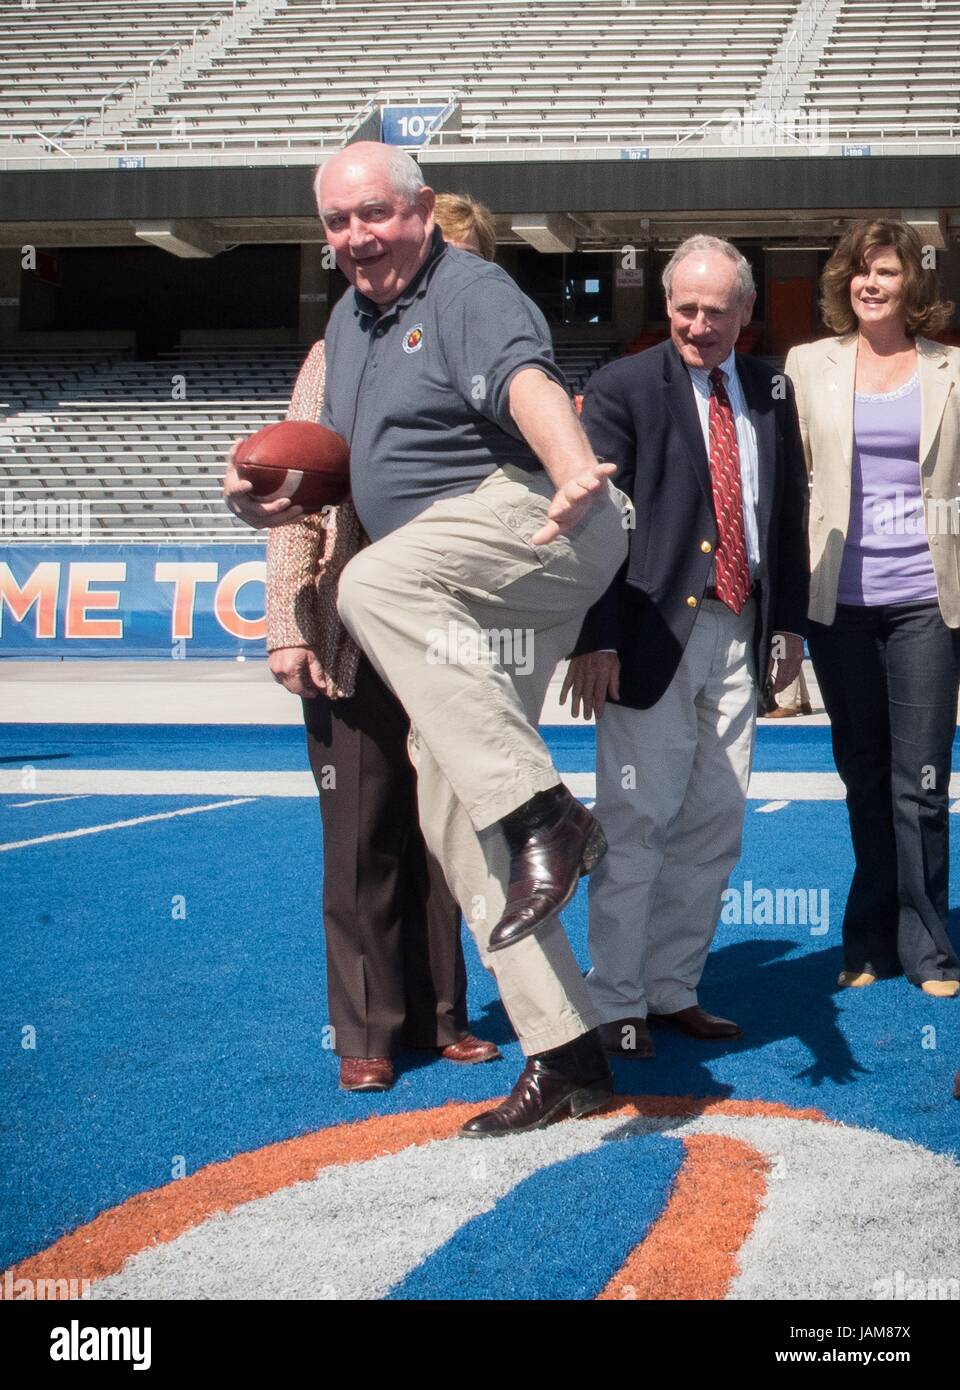 U.S. Agriculture Secretary Sonny Perdue strikes the American football trophy pose during a visit to at Boise State University June 2, 2017 in Boise, Idaho. Perdue, a former governor of Georgia, played football in college. Stock Photo